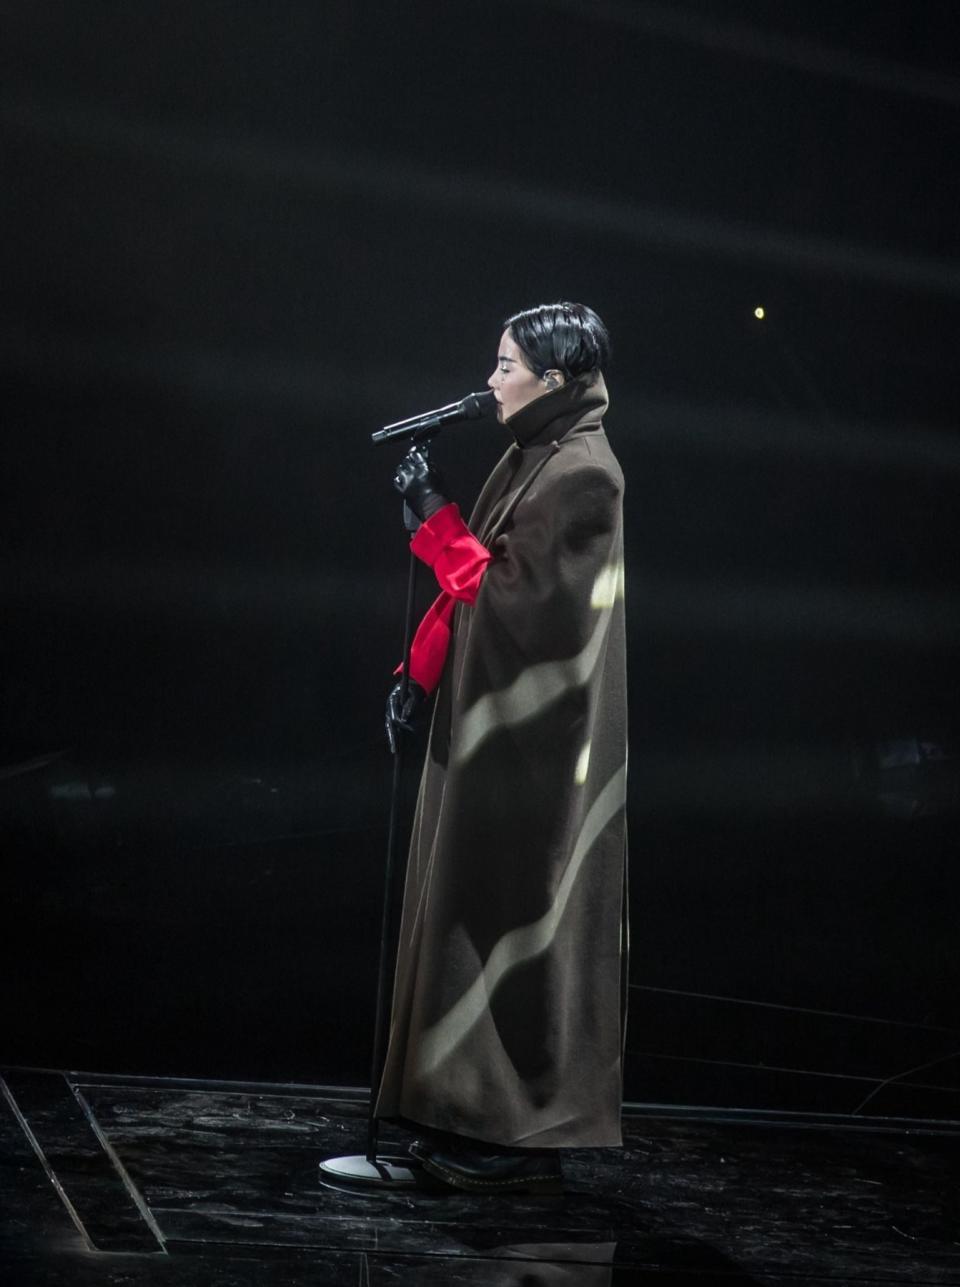 December 30, 2016 styled by Titi Kwan, on-stage during her “Faye’s Moments Live 2016” concert in Shanghai, China